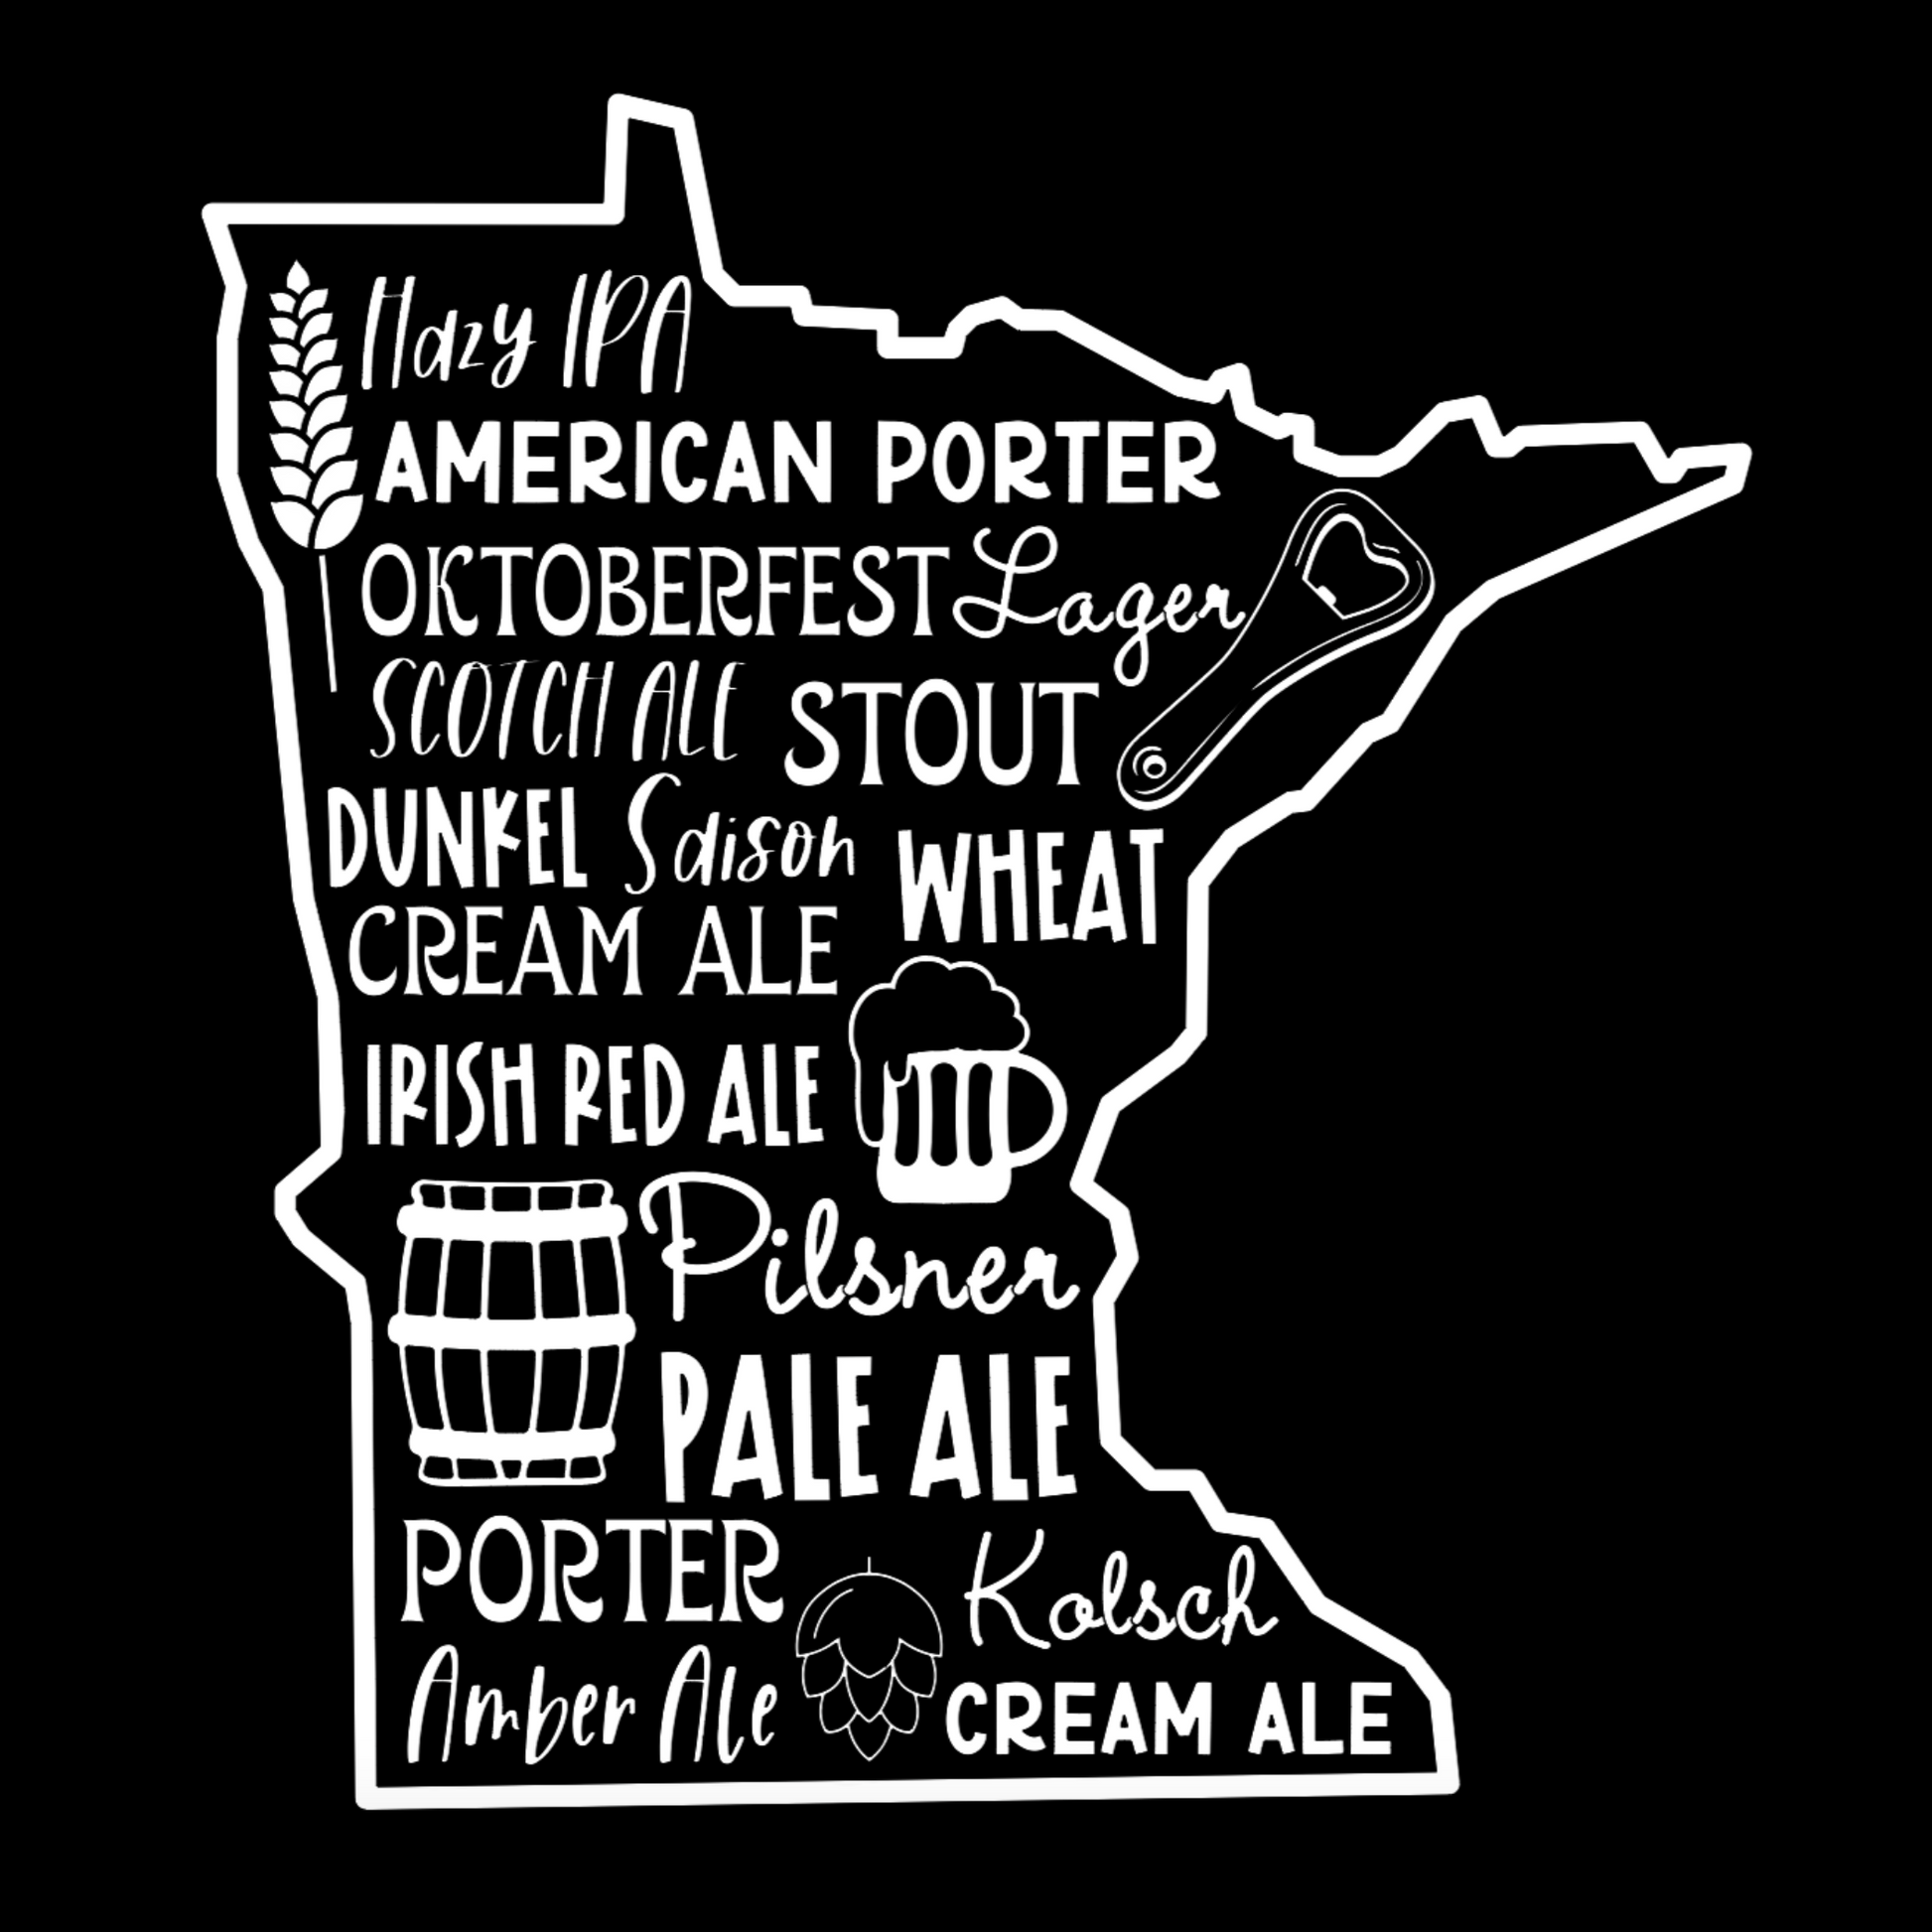 Minnesota Beers - T-Shirt with hazy ipa, American porter, Oktoberfest, lager, scotch ale, stout, dunkel, saison, wheat, cream ale, Irish red ale, pilsner, pale ale, porter, kolsch, amber ale, cream ale on the front in the state of Minnesota with icons of a hop, glass of beer, barrel of beer, bottle opener, and a wheat strand (design is white on a black background)